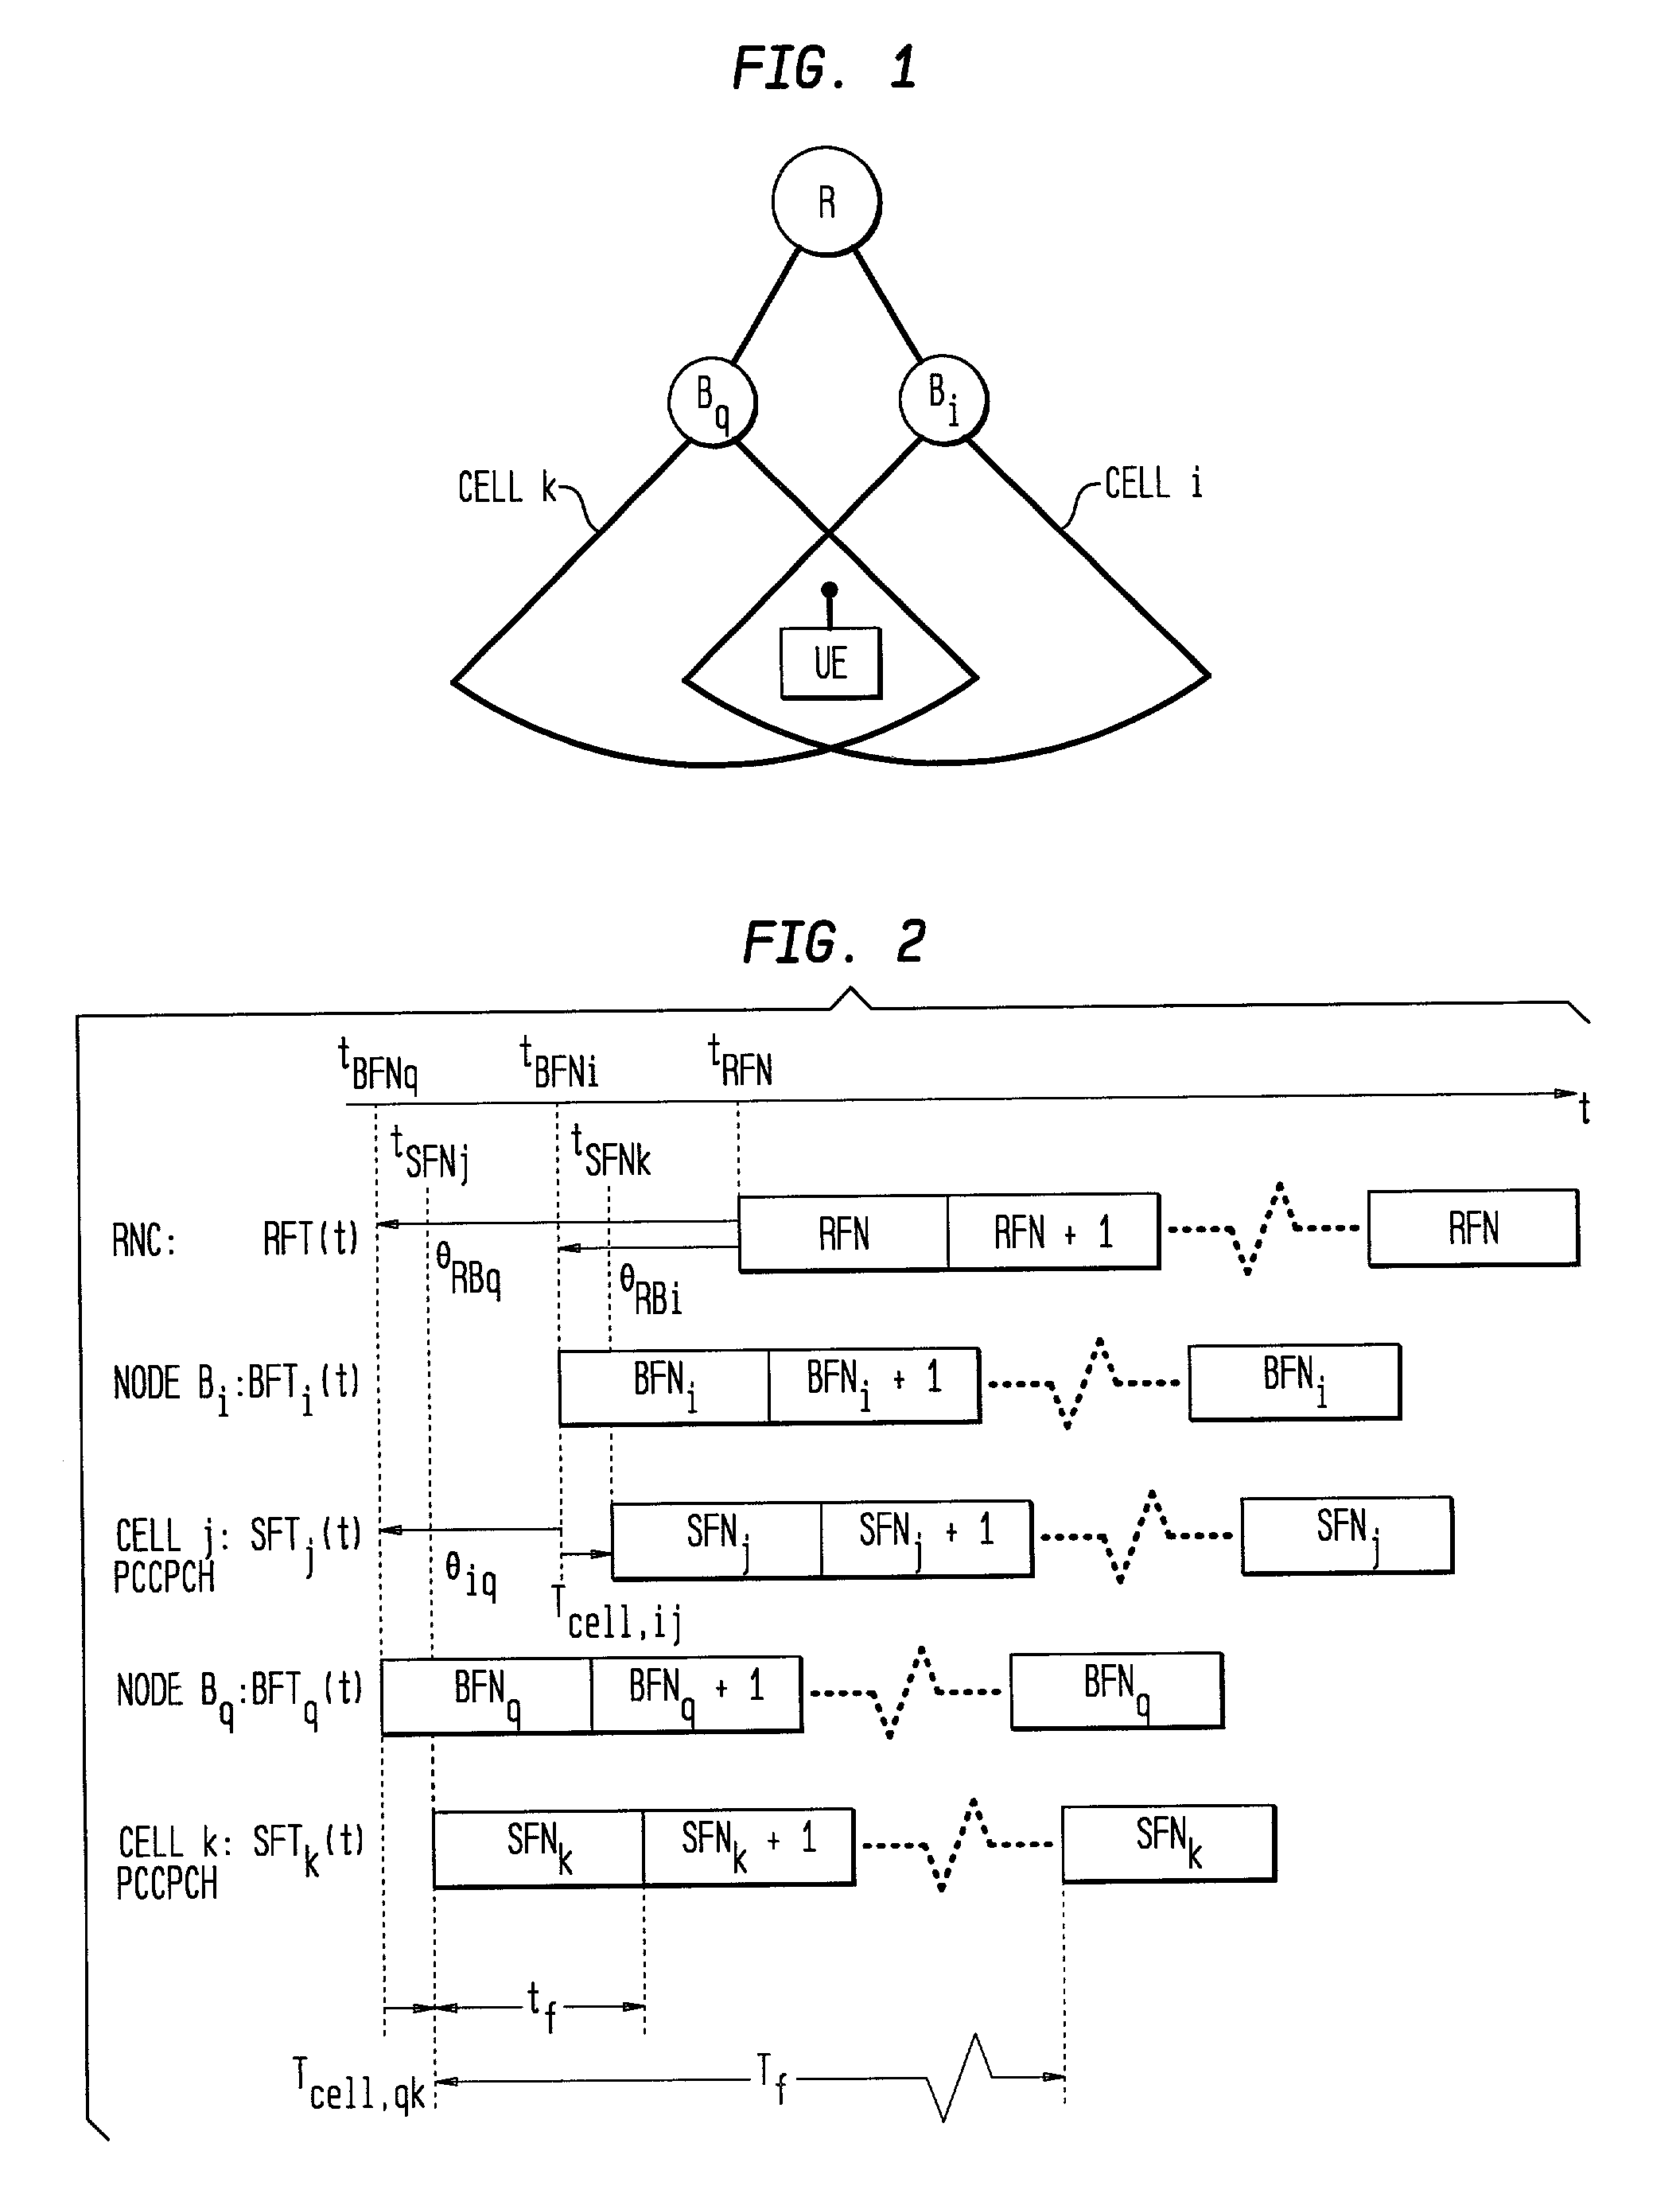 Estimating a time offset between link points in a communication network operating in a frequency division duplex mode